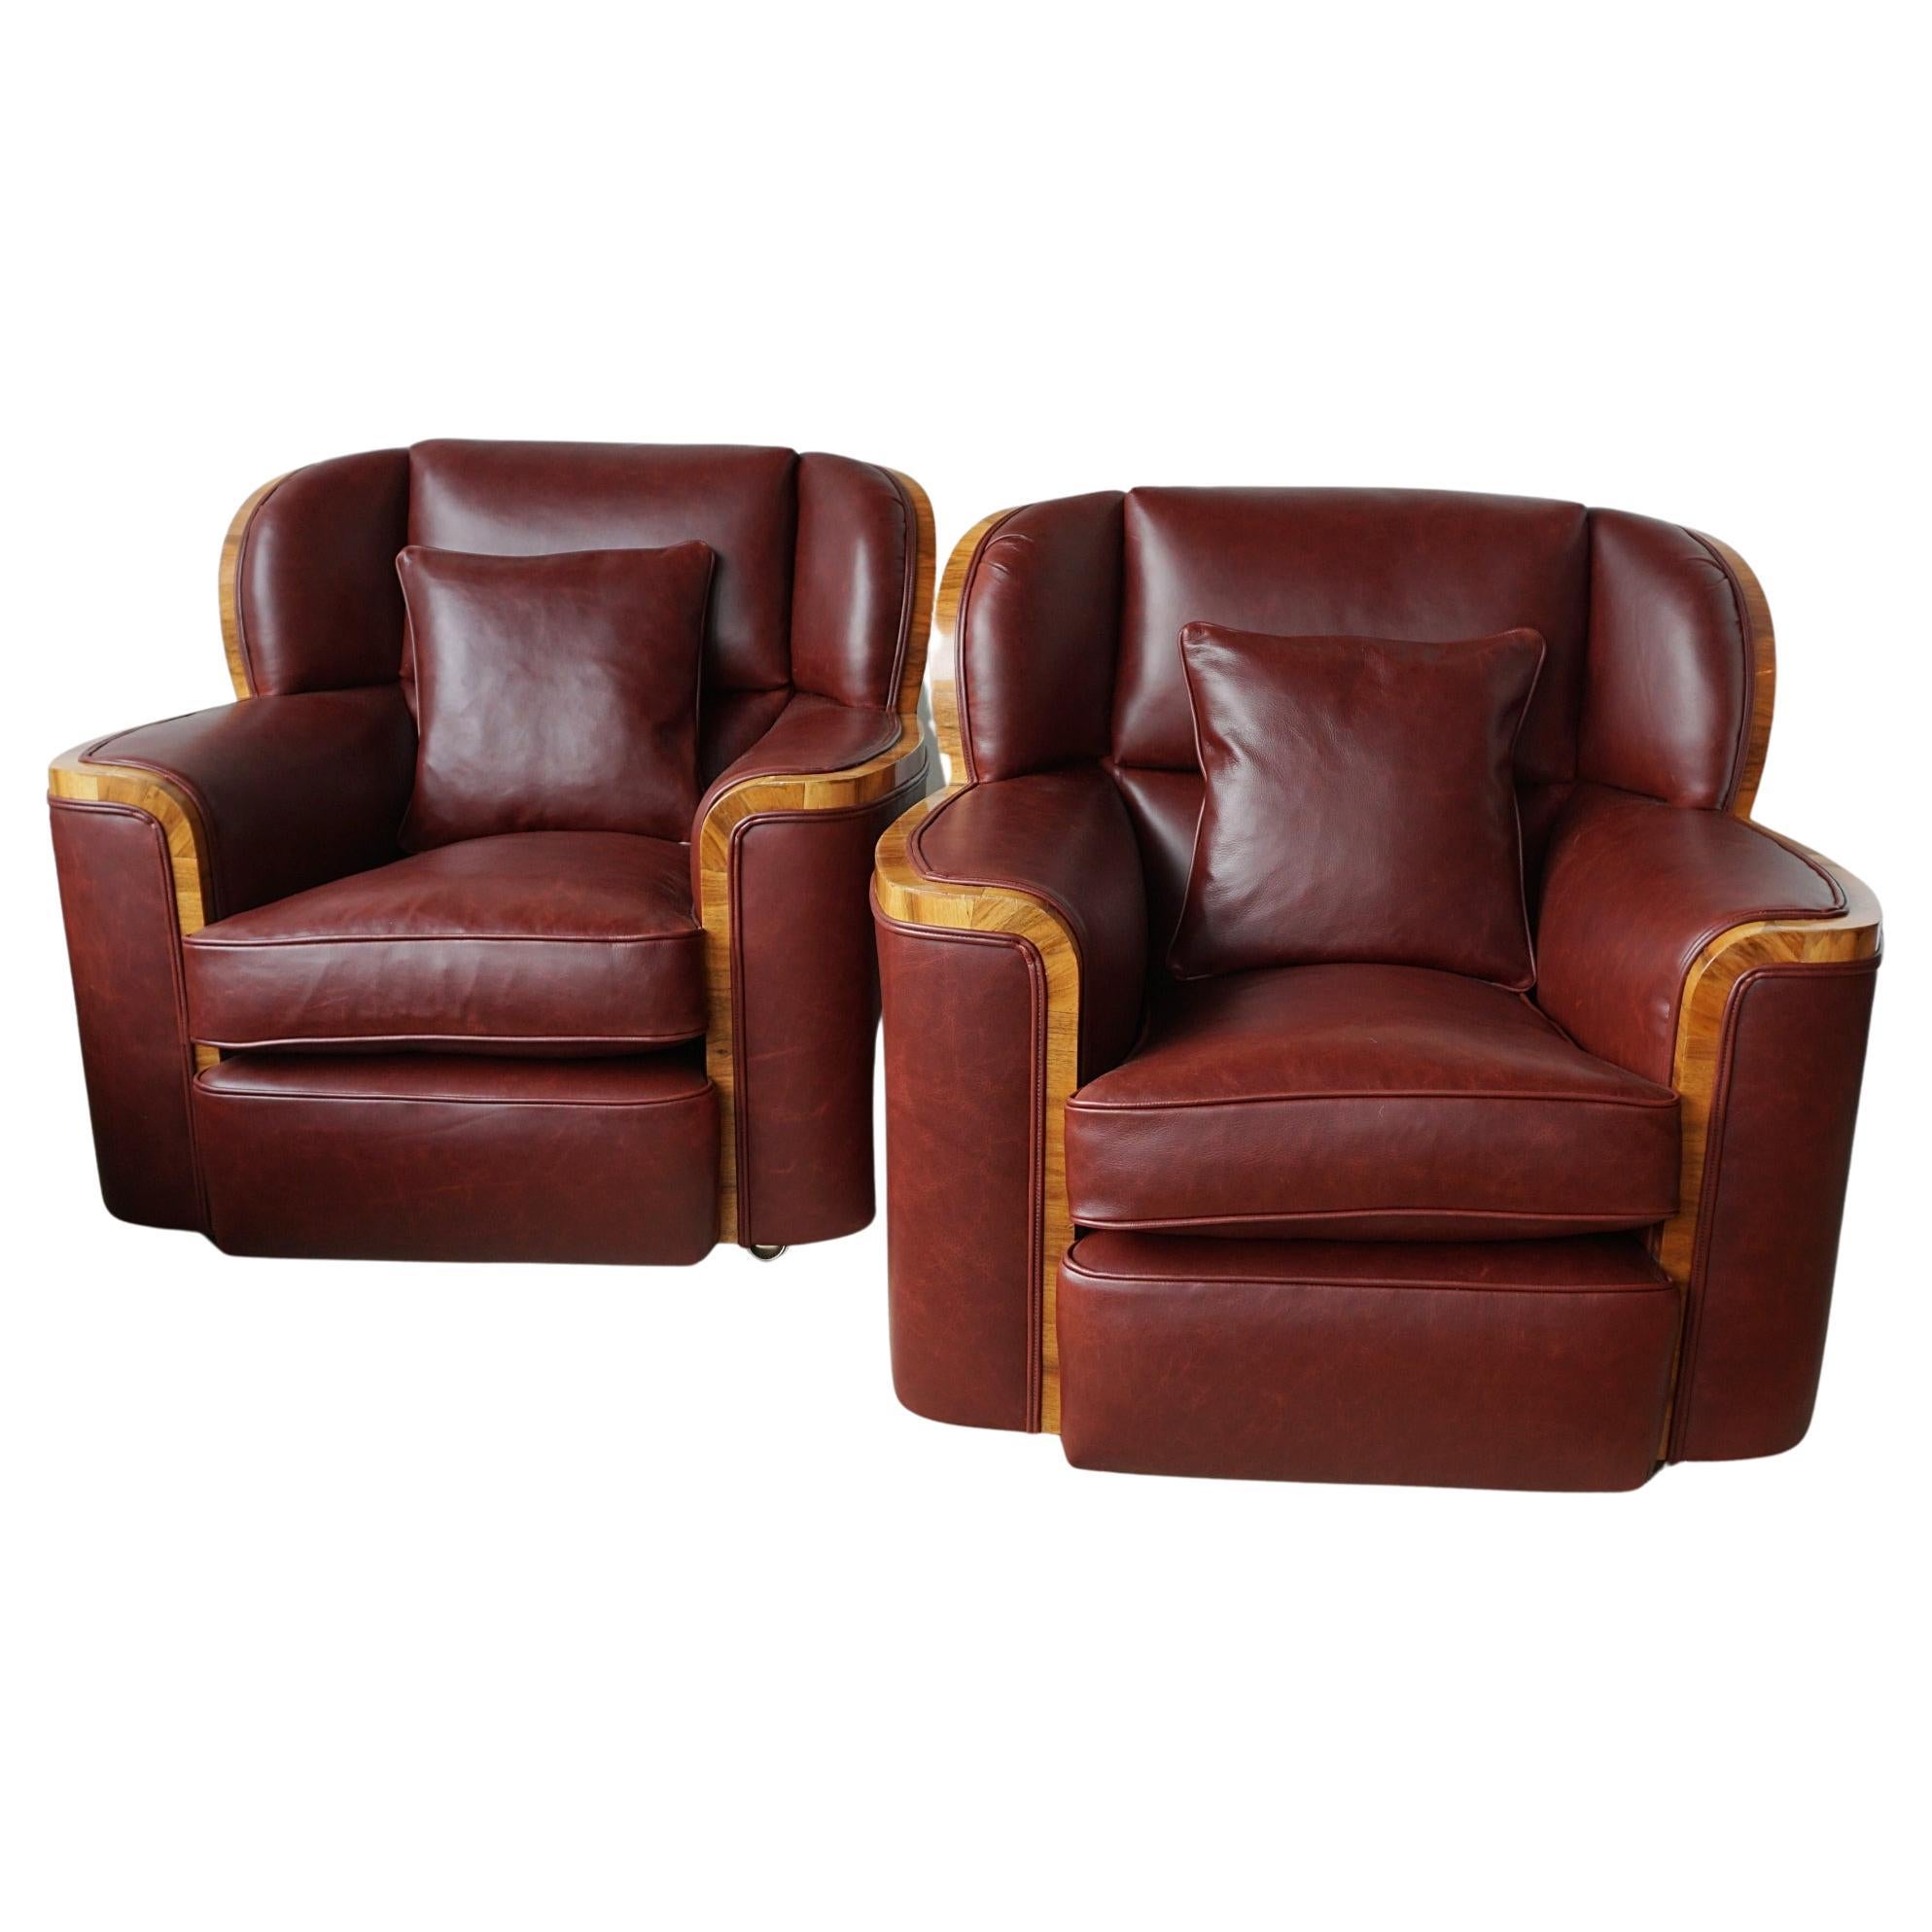 Original Art Deco Chestnut Leather and Walnut Bankers Armchairs  For Sale